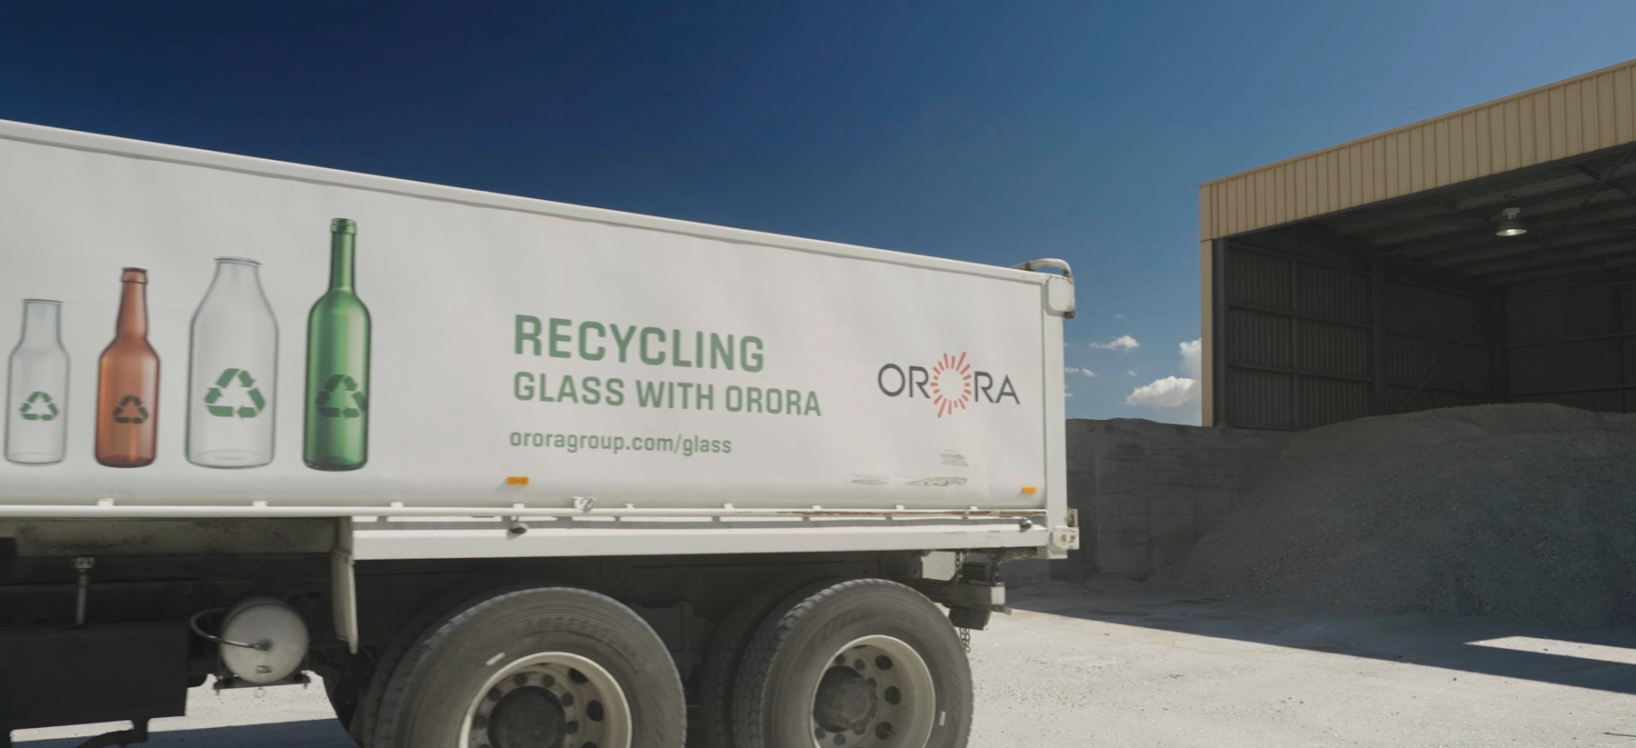 Glass Recycling with Orora Truck